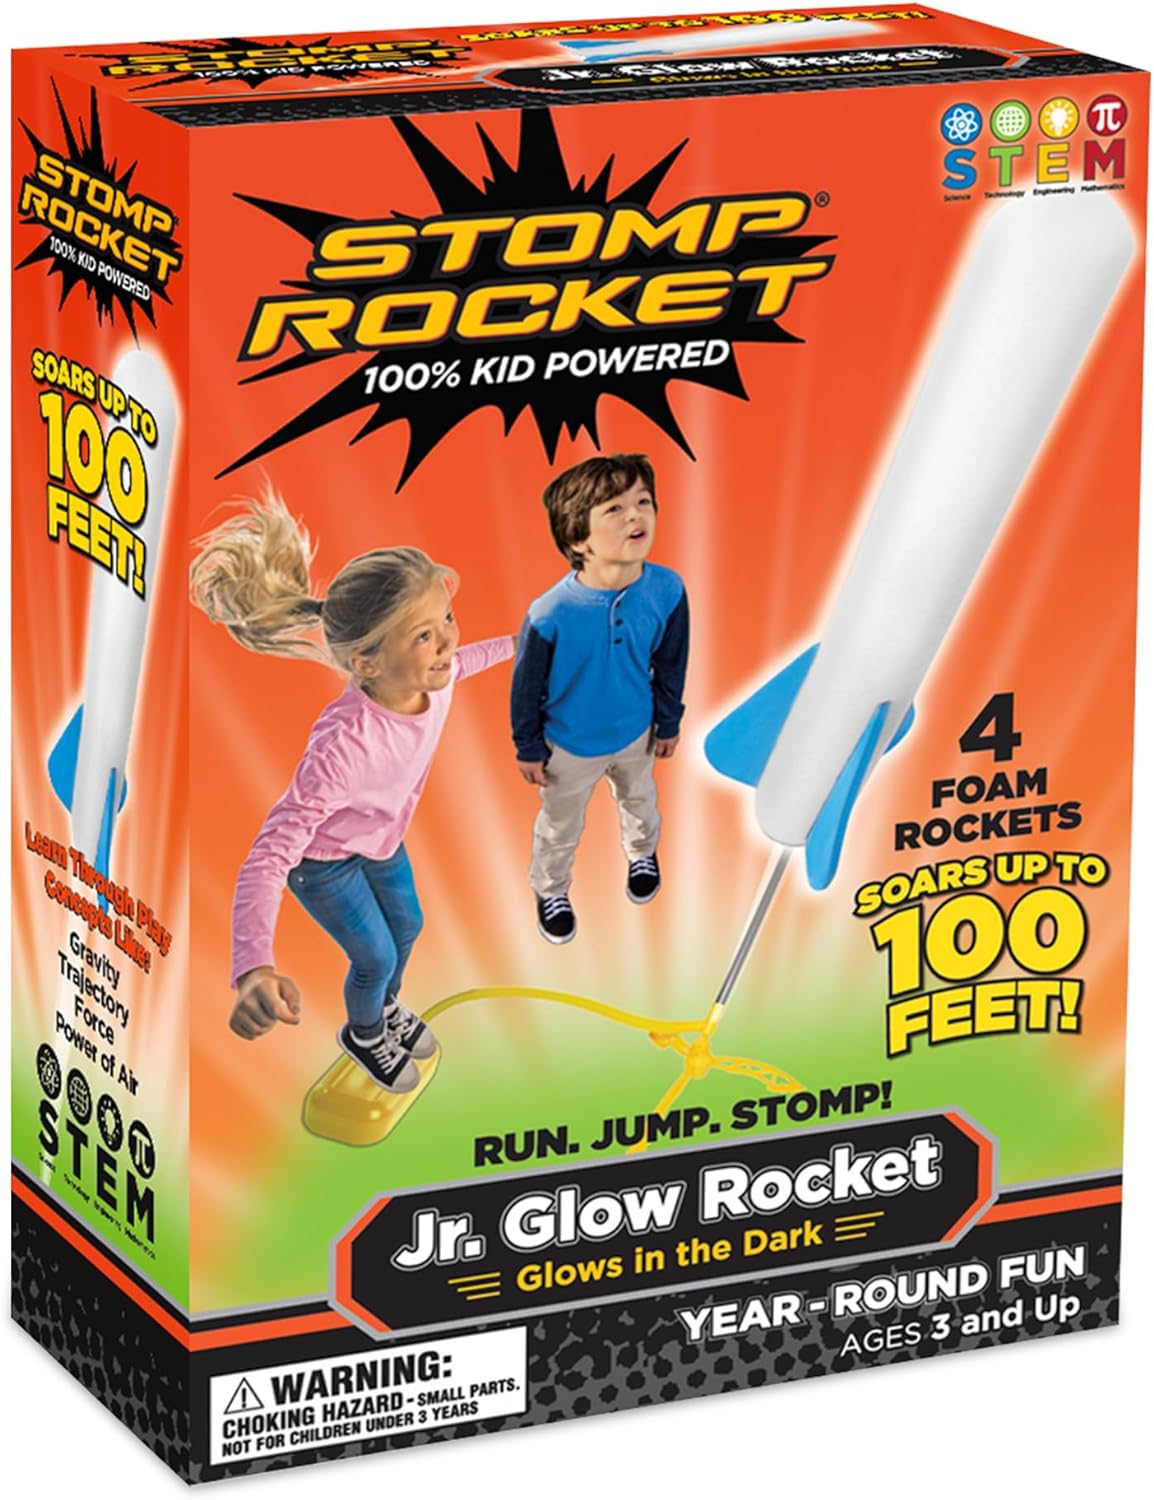 Stomp Rocket® Original Jr. Glow Rocket Launcher for Kids, Soars up to 100 Ft, 4 Foam Rockets and Adjustable Launcher, Gift for Boys and Girls Ages 3 Years and up - image 1 of 7